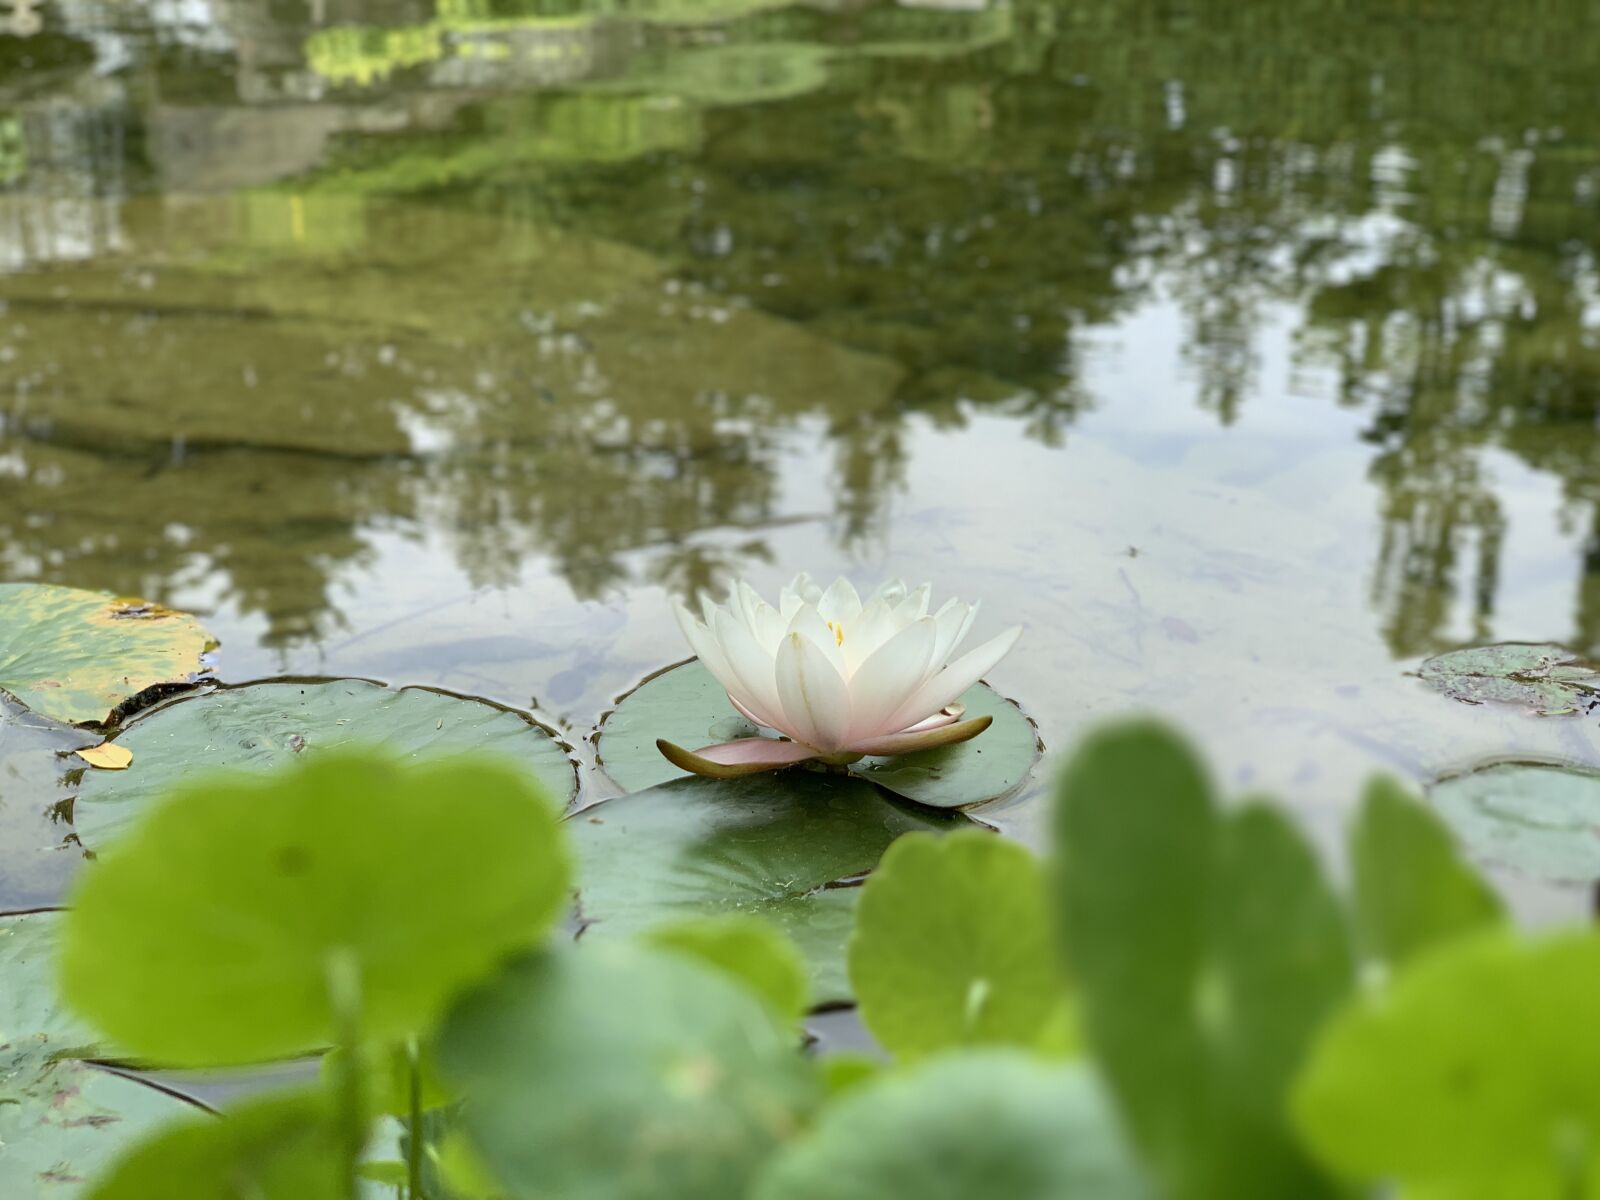 Apple iPhone XS Max + iPhone XS Max back dual camera 6mm f/2.4 sample photo. Water lily, lily pad photography